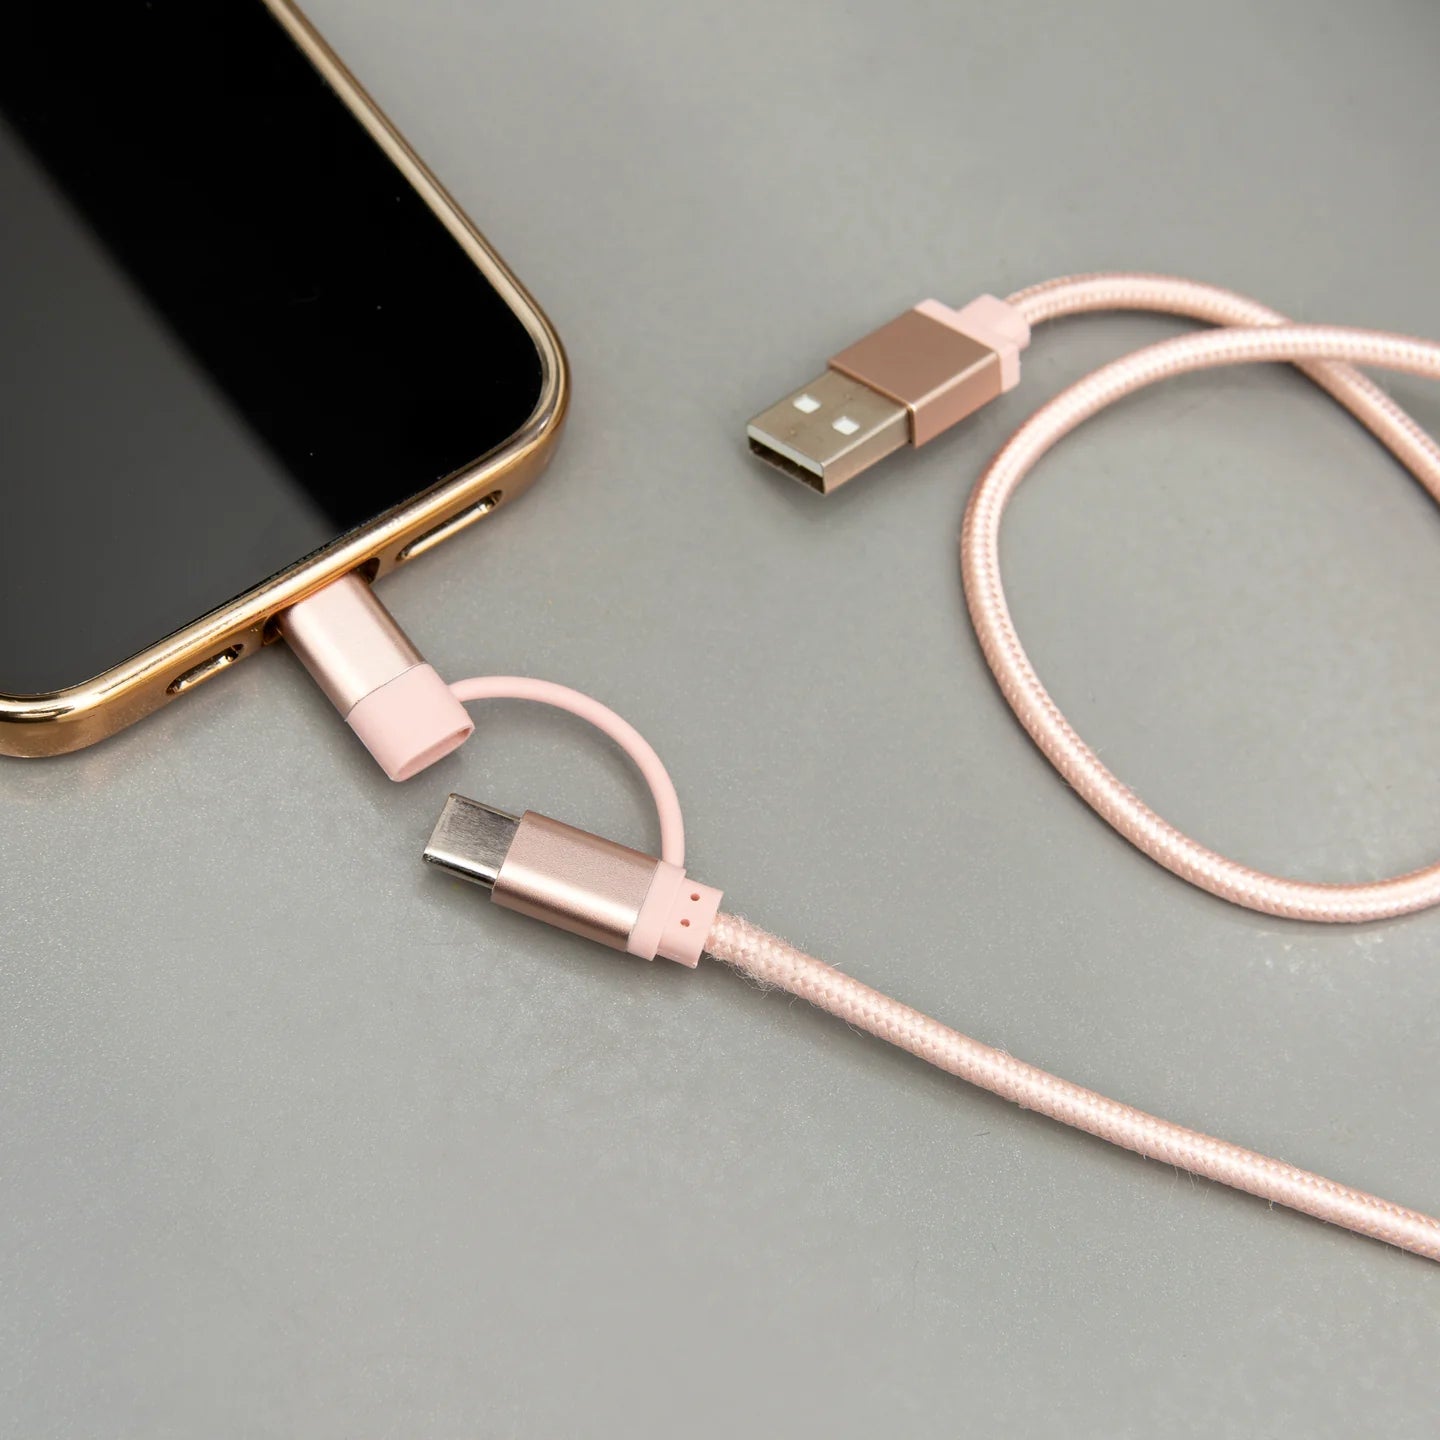 Fab Gifts | Kikkerland Rose Gold 2-In-1 Braided Cable by Weirs of Baggot Street